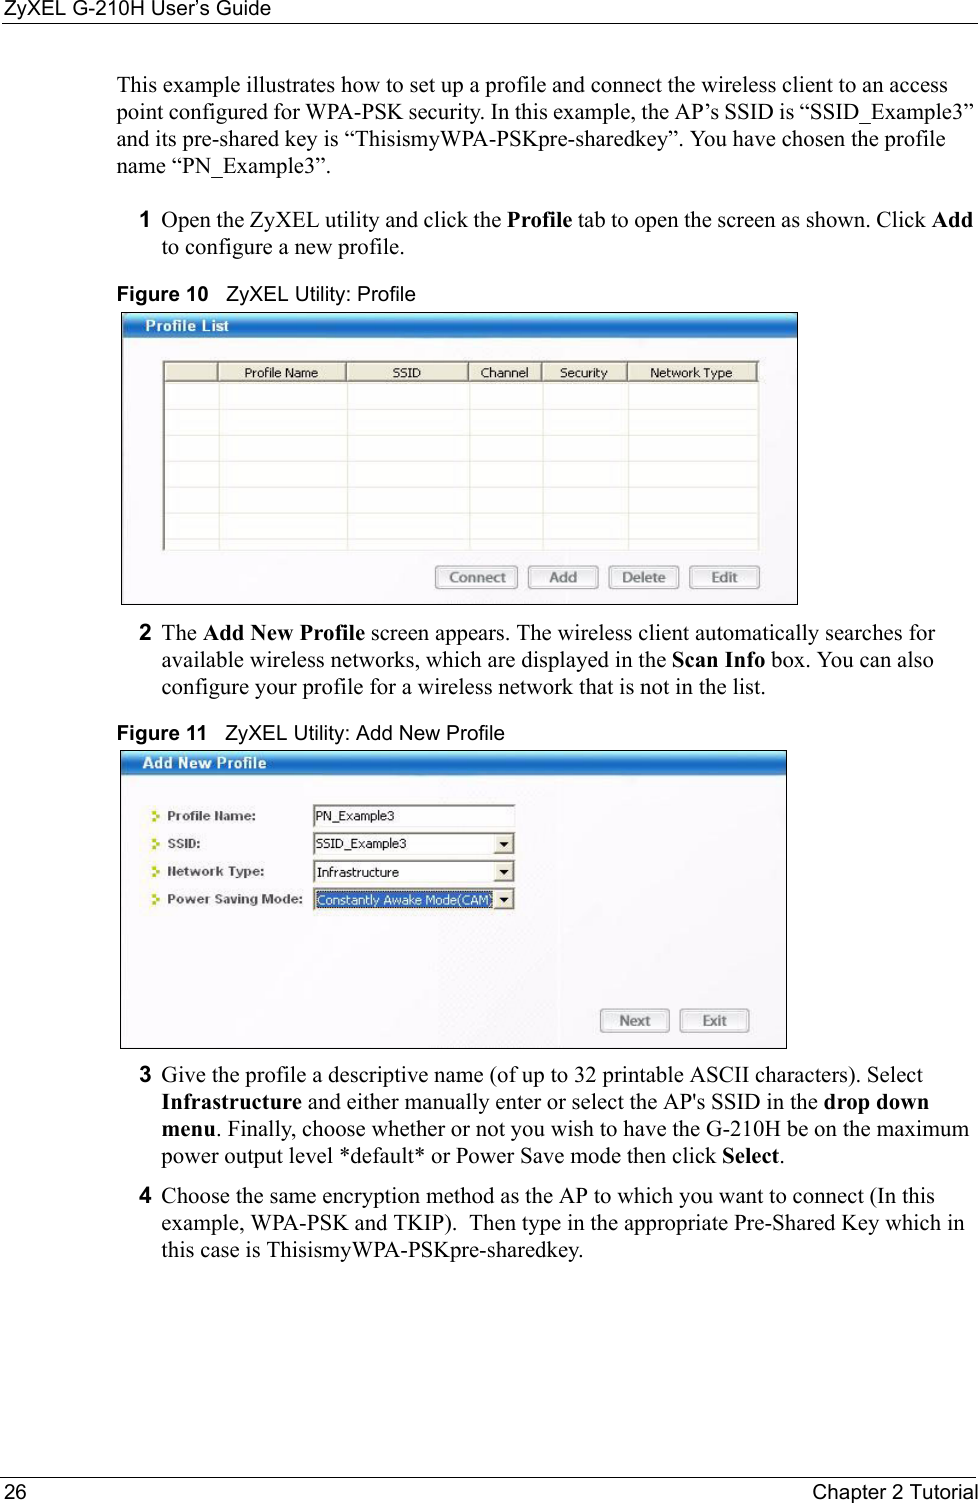 ZyXEL G-210H User’s Guide26 Chapter 2 TutorialThis example illustrates how to set up a profile and connect the wireless client to an access point configured for WPA-PSK security. In this example, the AP’s SSID is “SSID_Example3” and its pre-shared key is “ThisismyWPA-PSKpre-sharedkey”. You have chosen the profile name “PN_Example3”.1Open the ZyXEL utility and click the Profile tab to open the screen as shown. Click Add to configure a new profile.Figure 10   ZyXEL Utility: Profile2The Add New Profile screen appears. The wireless client automatically searches for available wireless networks, which are displayed in the Scan Info box. You can also configure your profile for a wireless network that is not in the list. Figure 11   ZyXEL Utility: Add New Profile3Give the profile a descriptive name (of up to 32 printable ASCII characters). Select Infrastructure and either manually enter or select the AP&apos;s SSID in the drop down menu. Finally, choose whether or not you wish to have the G-210H be on the maximum power output level *default* or Power Save mode then click Select.4Choose the same encryption method as the AP to which you want to connect (In this example, WPA-PSK and TKIP).  Then type in the appropriate Pre-Shared Key which in this case is ThisismyWPA-PSKpre-sharedkey.